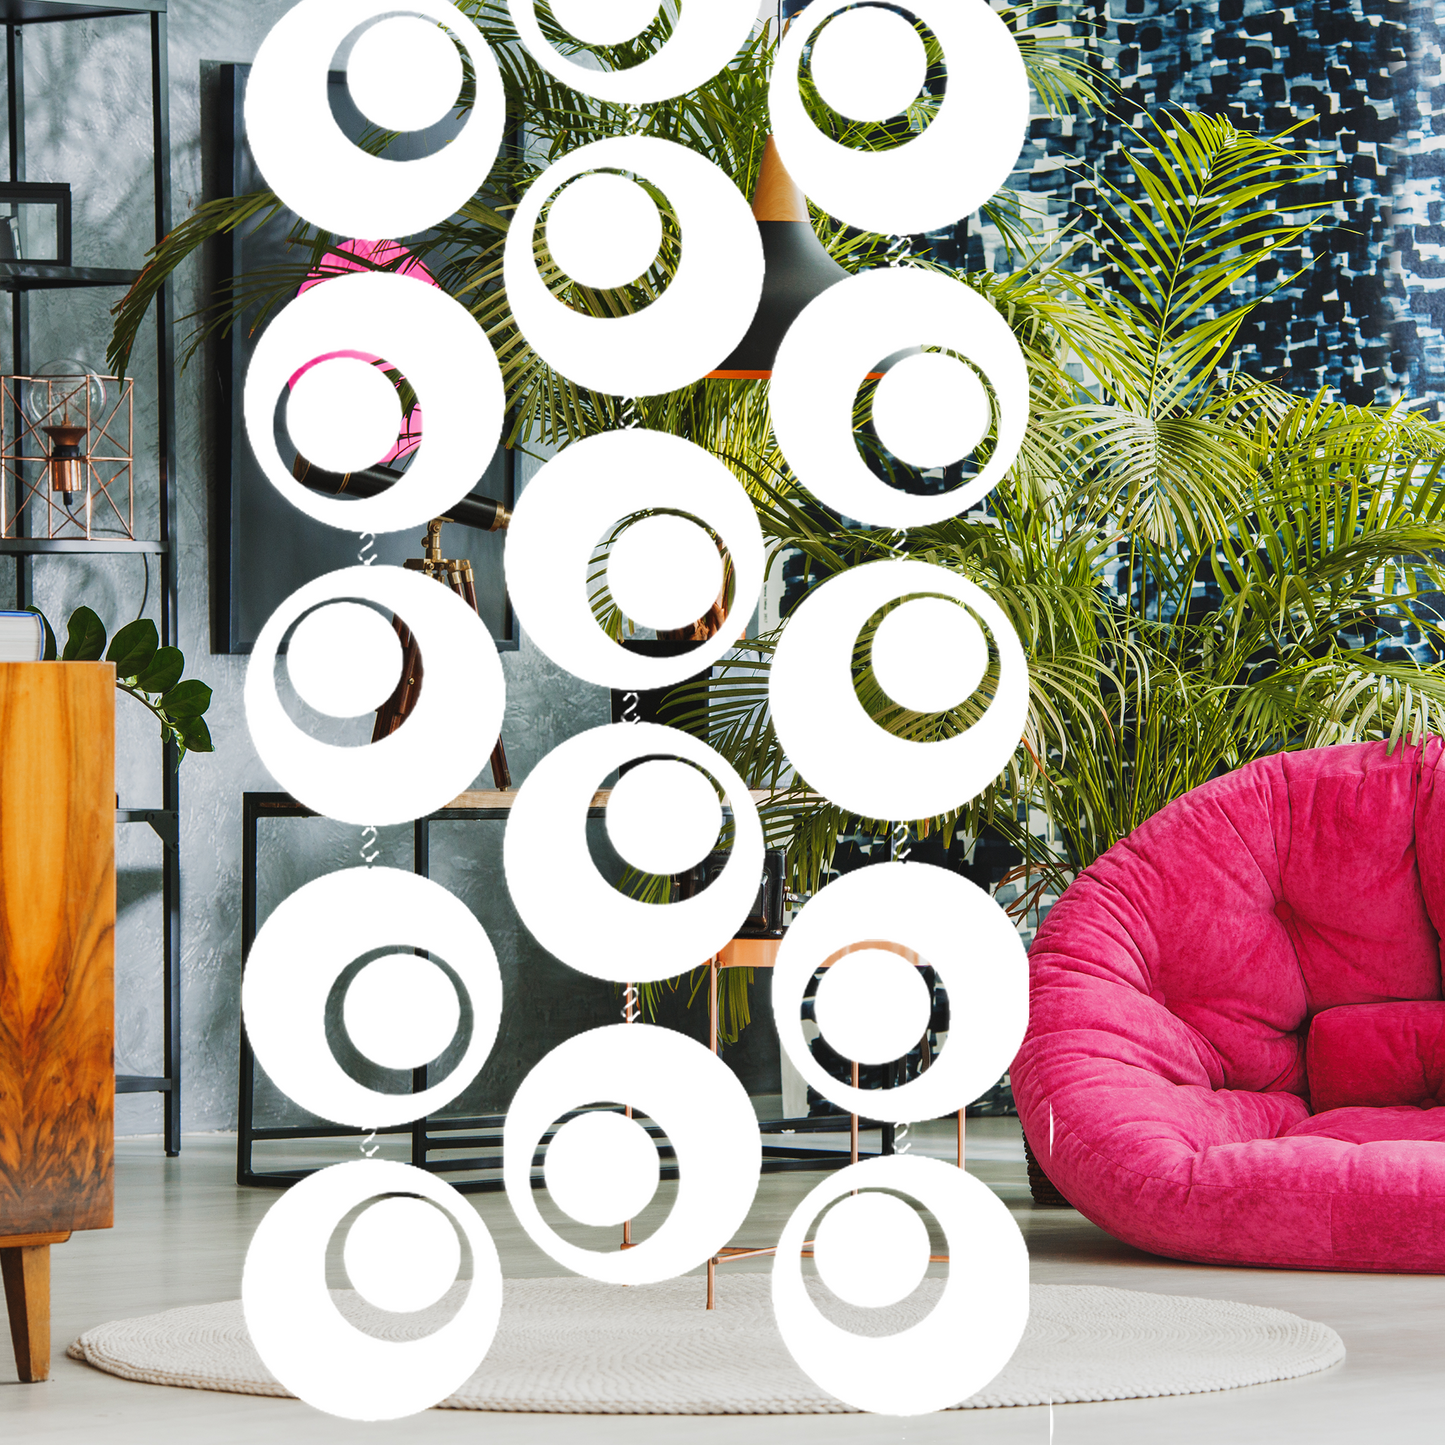 Groovy White hanging mobiles as a room divider in mod room with hot pink bean bag chair and plants - mobiles by AtomicMobiles.com